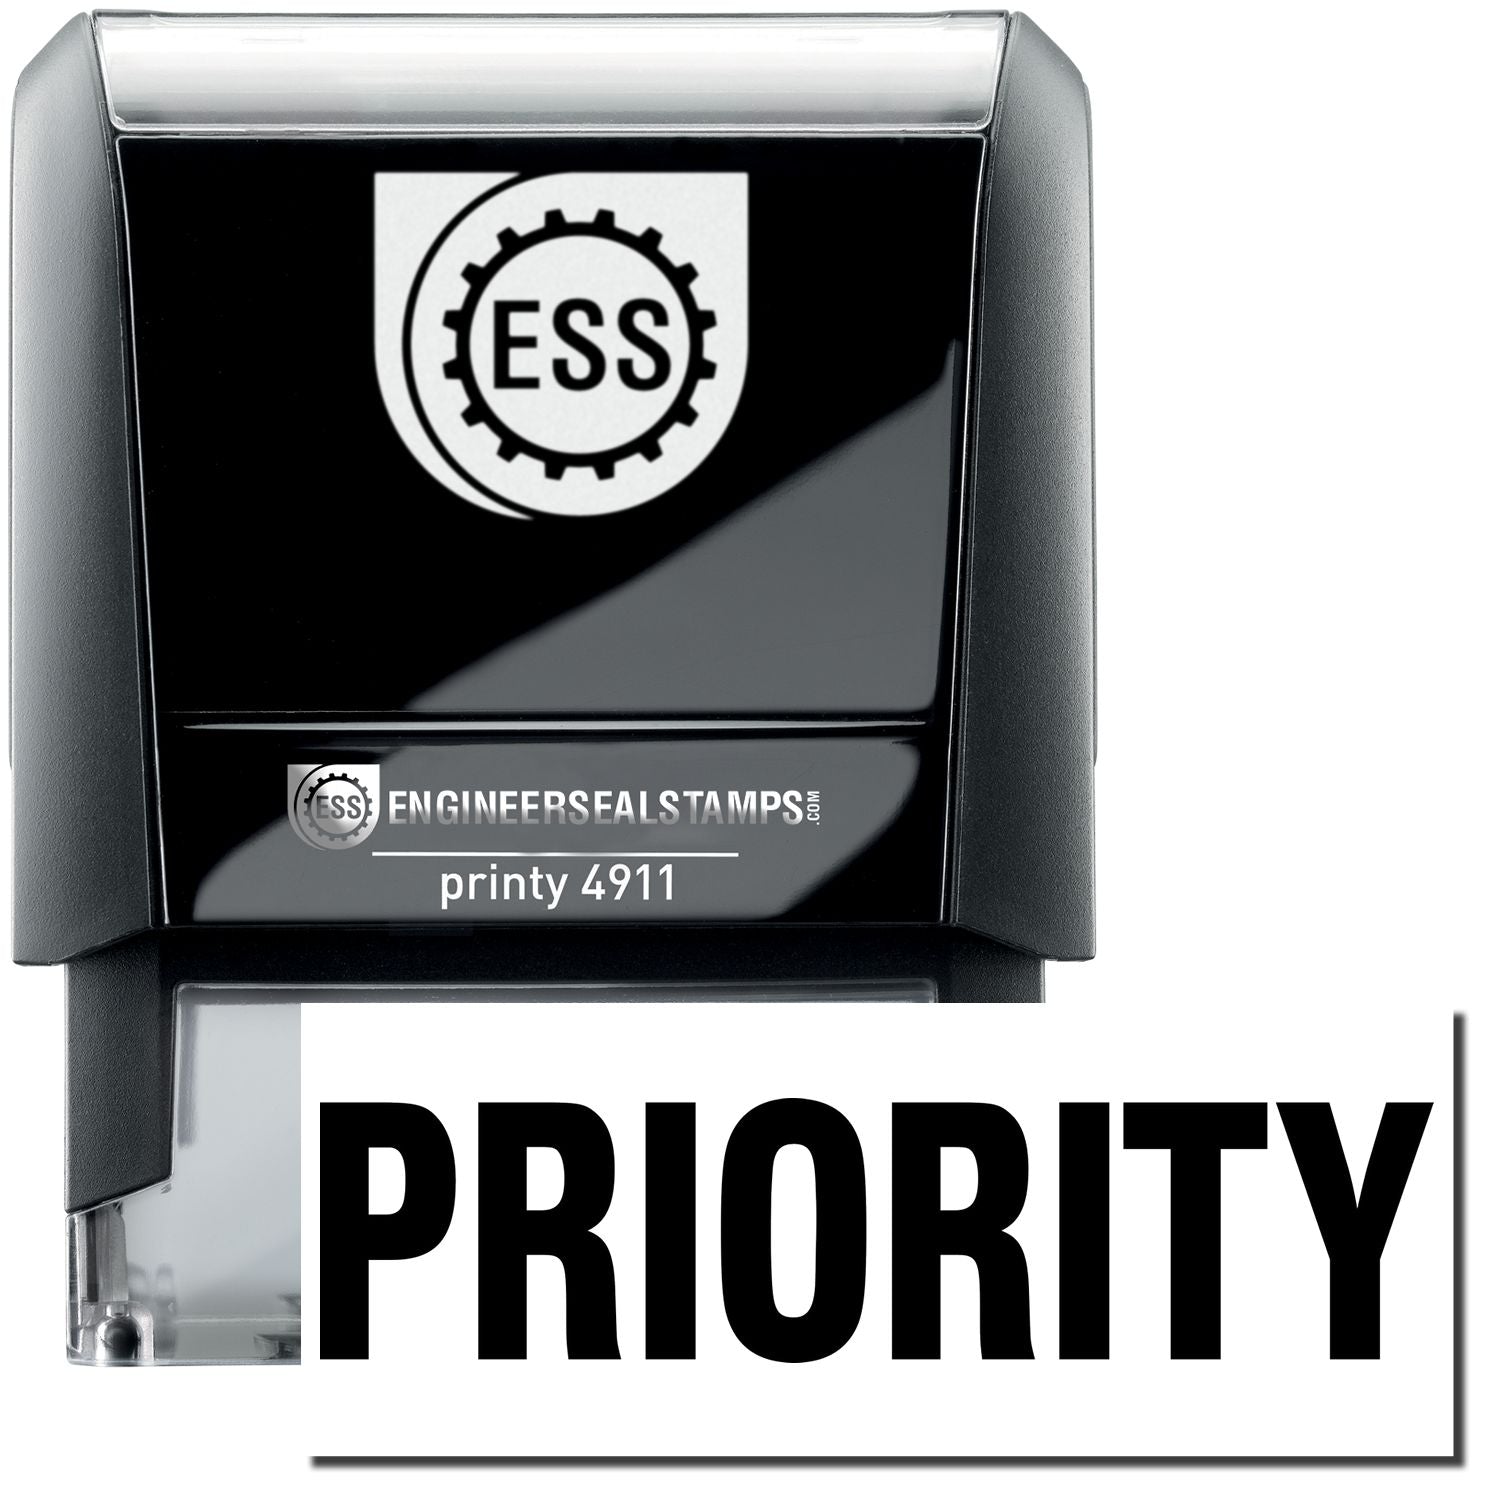 A self-inking stamp with a stamped image showing how the text "PRIORITY" in bold font is displayed after stamping.